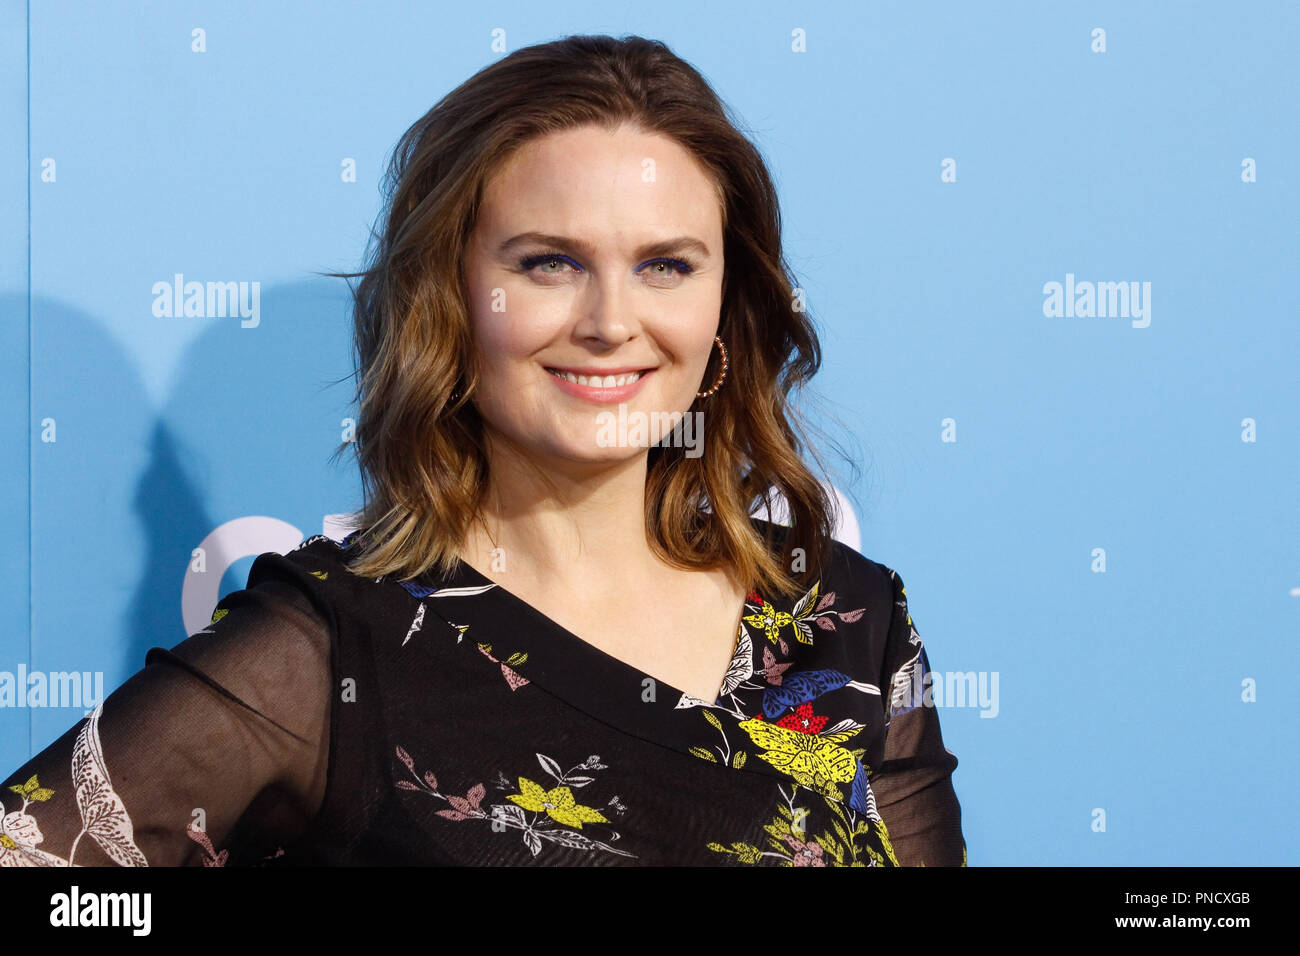 Page 2 - Emily Deschanel Los Angeles Premiere High Resolution Stock  Photography and Images - Alamy